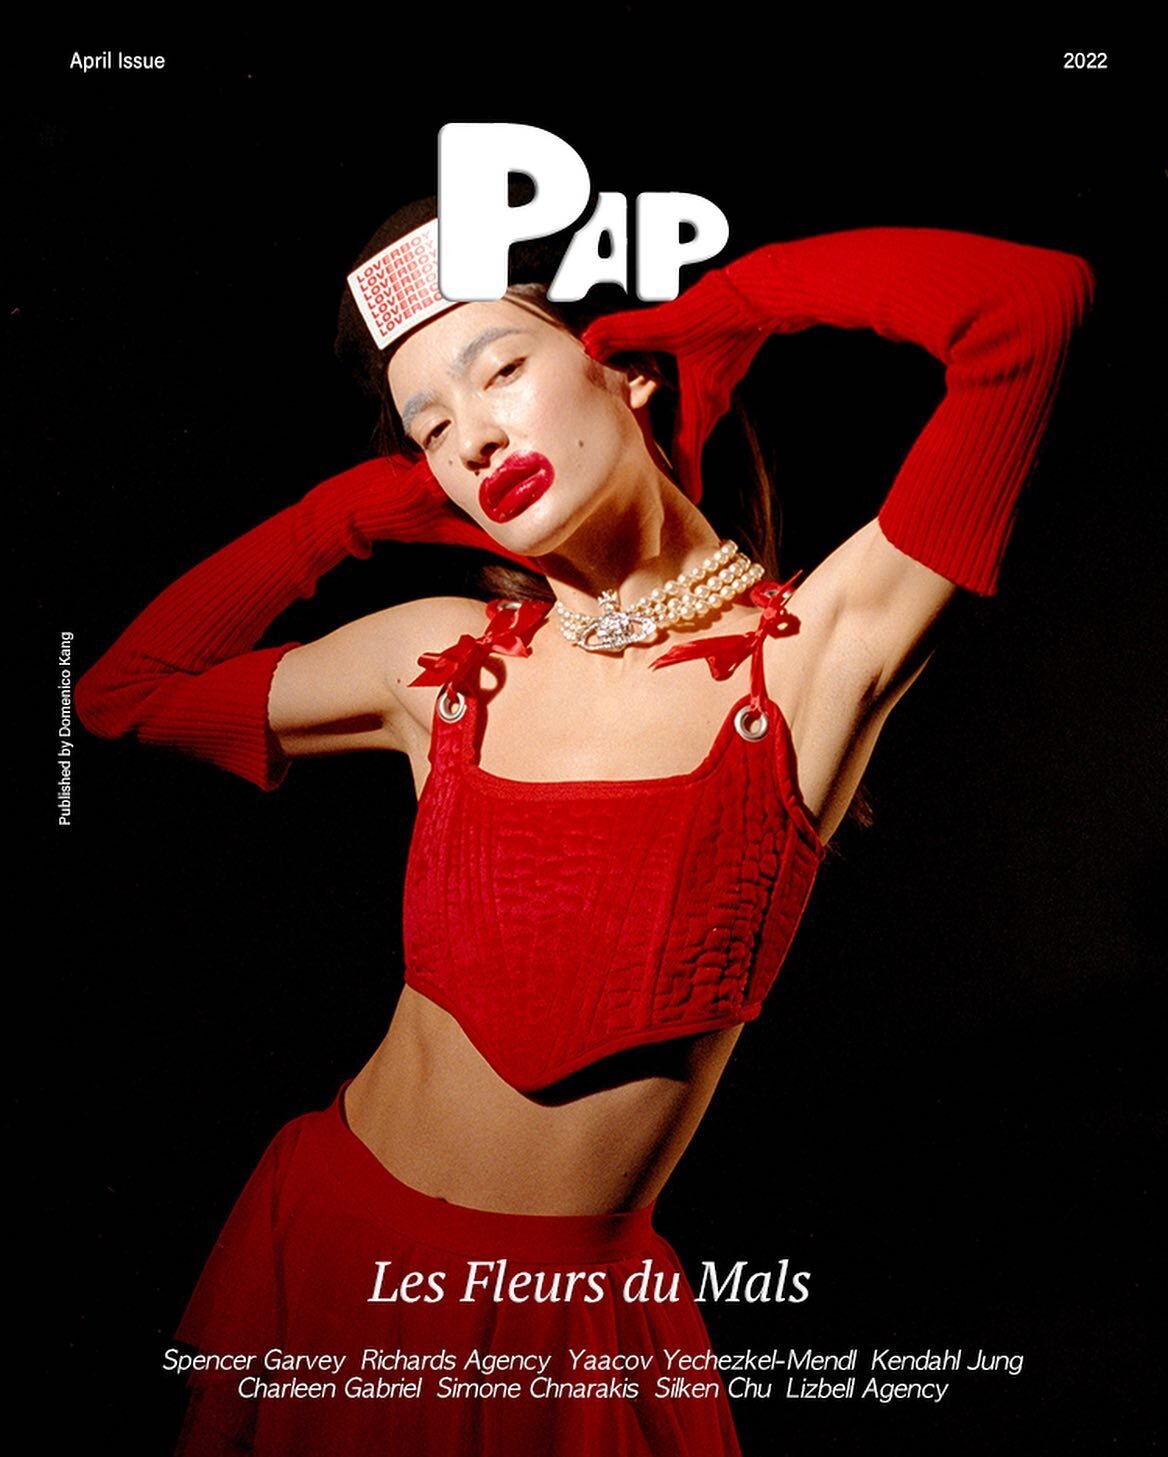 &ldquo;Les Fleurs du Mals&rdquo;
published by @kangdm for @pap_magazine
//
Creative Direction &amp; Styling: Spencer Garvey from Richards Agency (@sp.en.cer and @rmartists)
Photo: Yaacov Yechezkel-Mendl (@friendsofyaacov)
Model: Silken Chu from Lizbe